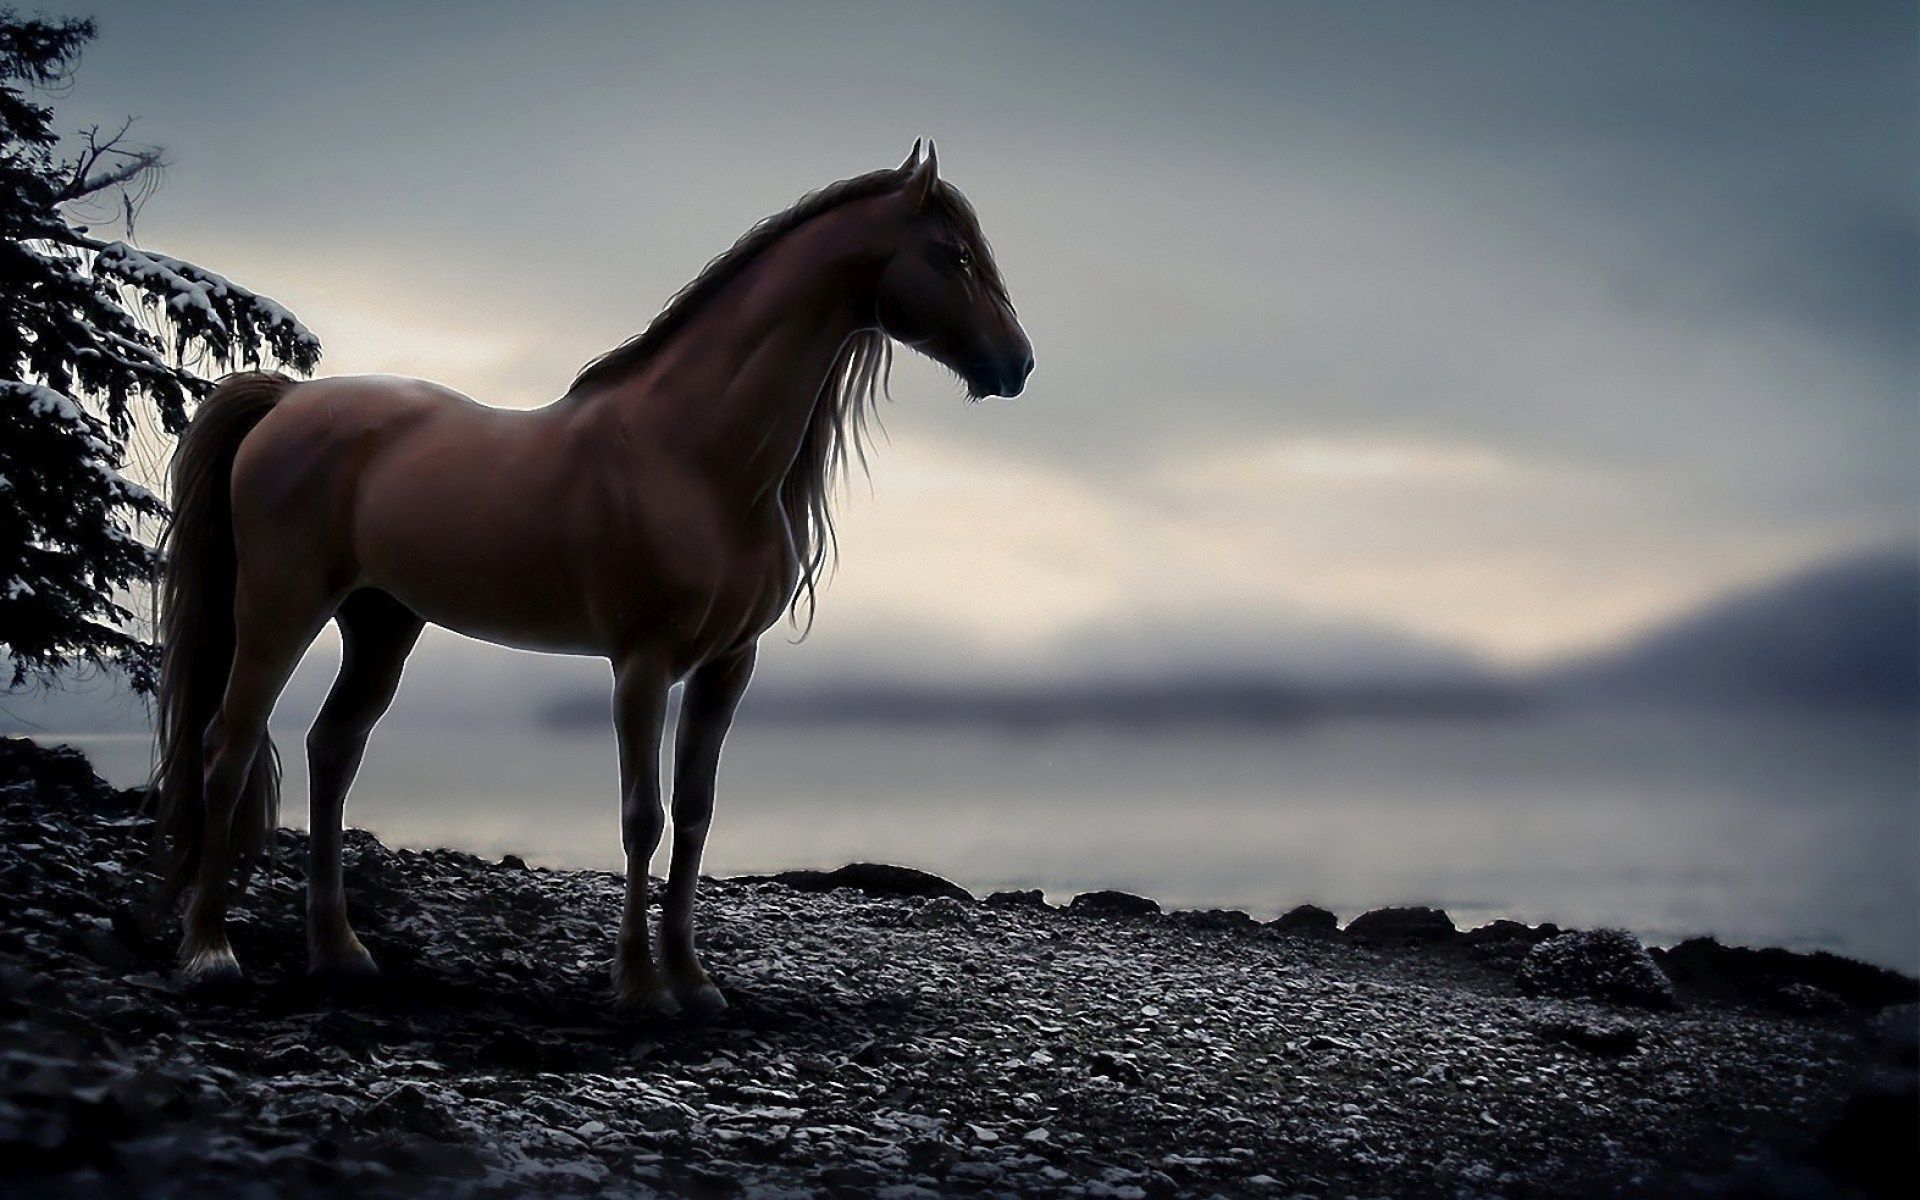 Two beautiful horse Wallpapers Download | MobCup